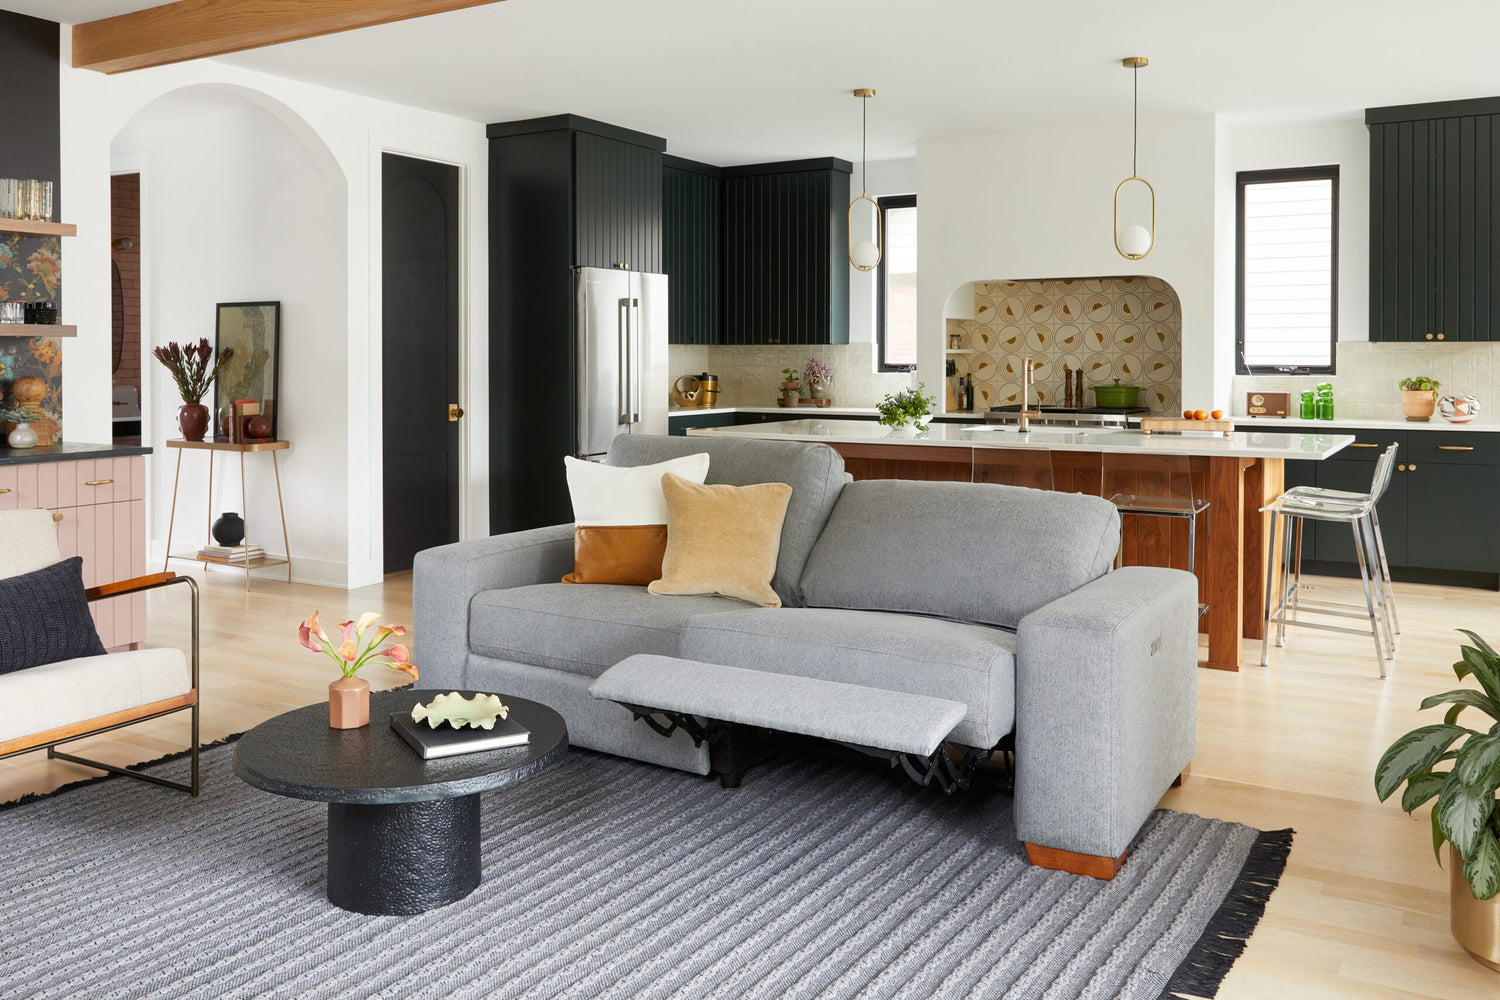 A modern living room and kitchen area with a gray reclining sofa adorned with pillows, a round black coffee table, light wood flooring, and black cabinets in the kitchen. Decorative items and plants enhance the cozy, contemporary ambiance.